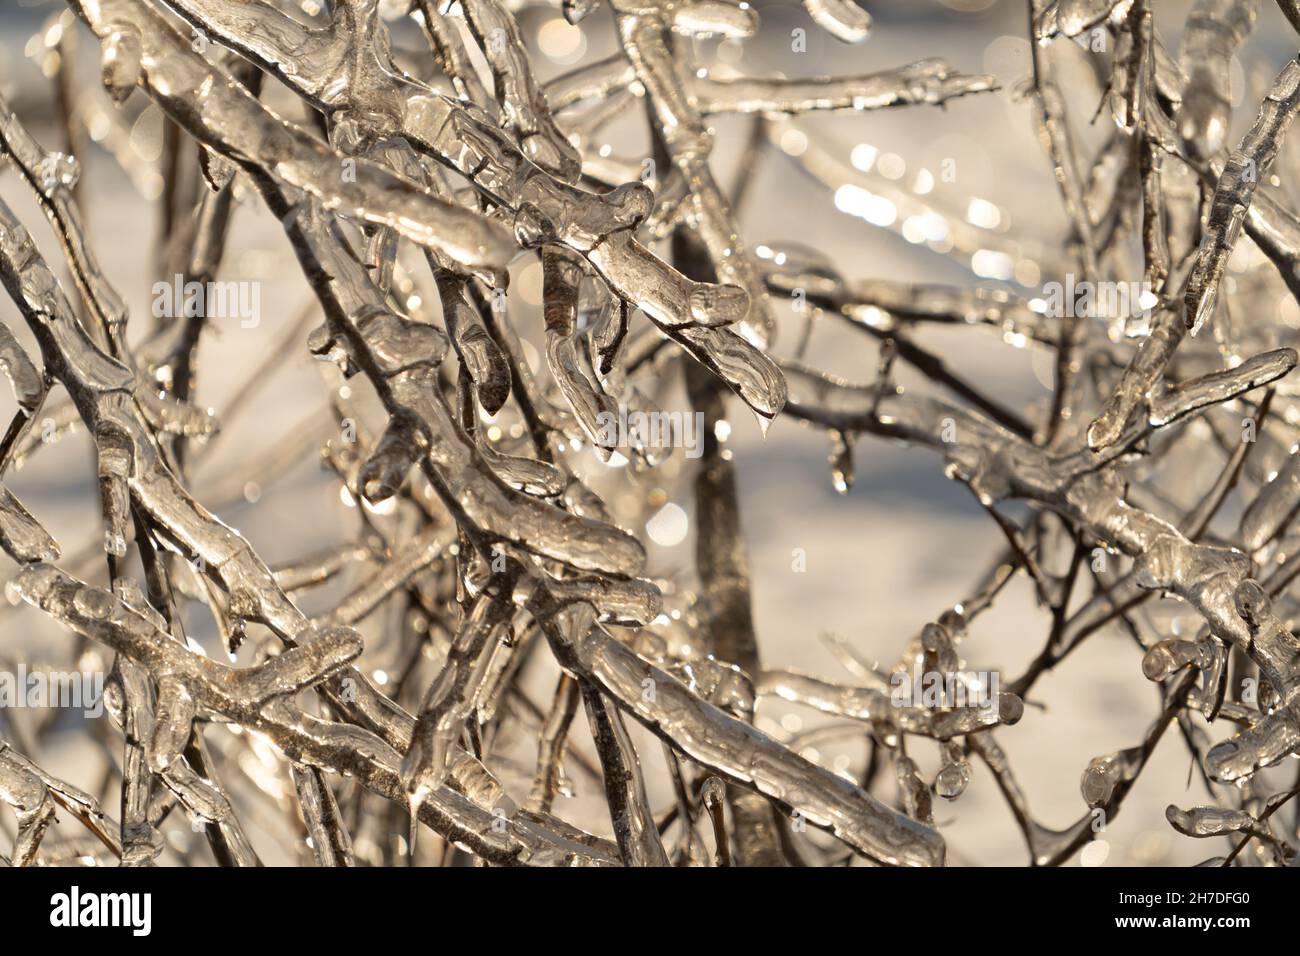 Natural background with ice crystals on plants after an icy rain. Stock Photo